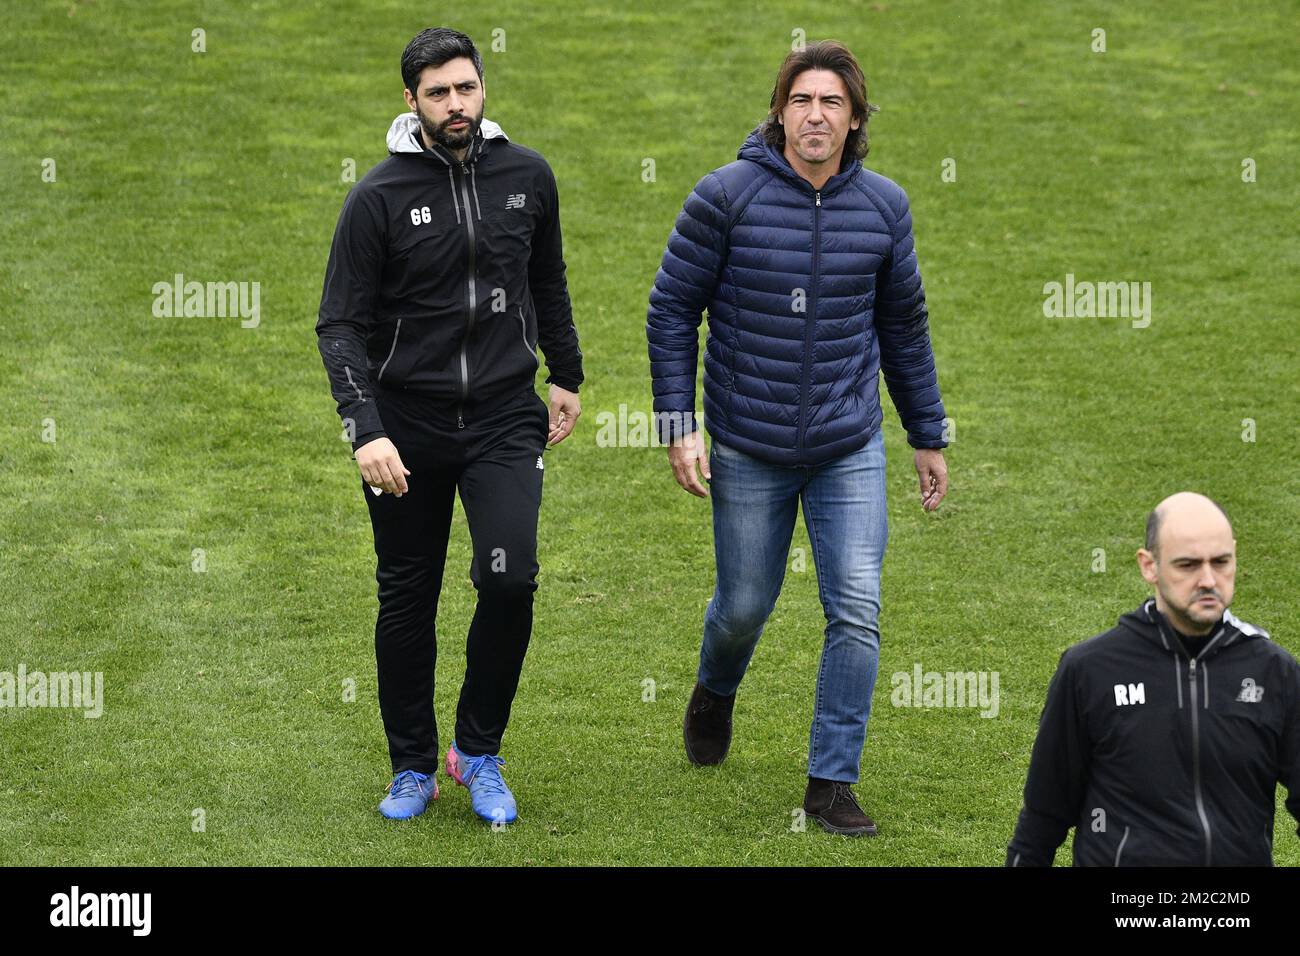 Standard's physical coach Jose Guilherme Oliveira Kruss Gomes and Standard's head coach Ricardo Sa Pinto pictured before a friendly soccer game between Belgian first division team Standard de Liege and German club Fortuna Dusseldorf on day five of the winter training camp in Marbella, Spain, Tuesday 09 January 2018. BELGA PHOTO YORICK JANSENS Stock Photo